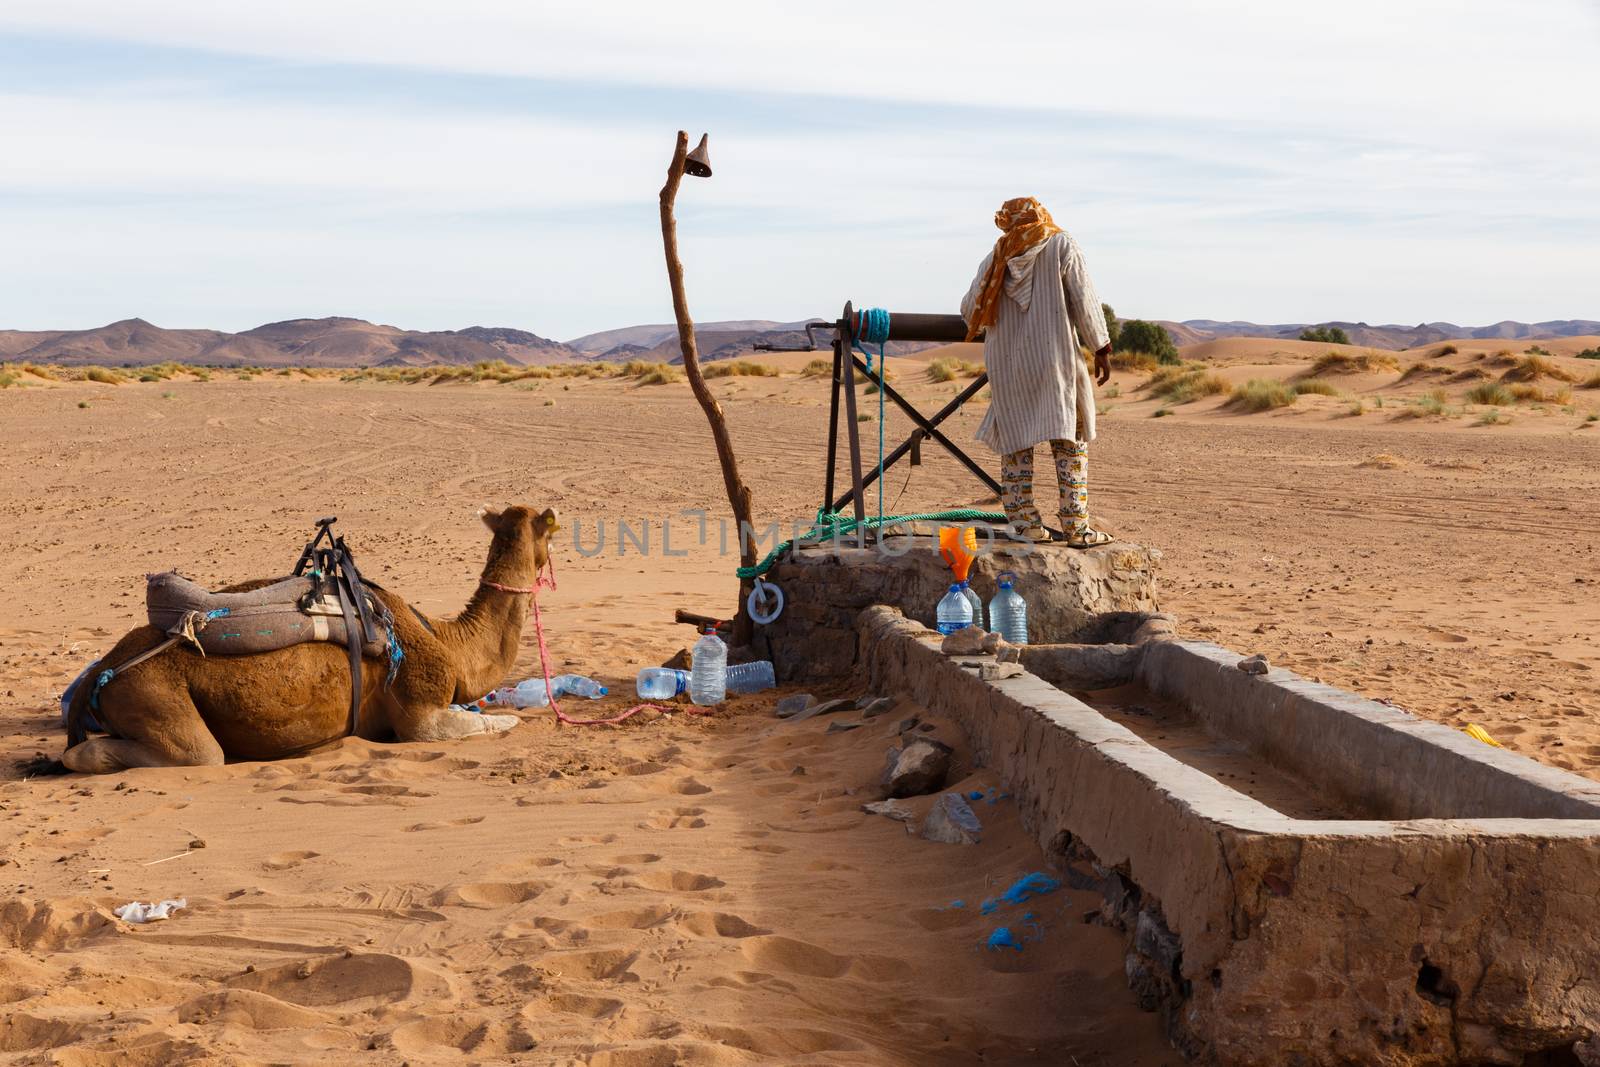 Berber and camel near the well, Morocco by Mieszko9